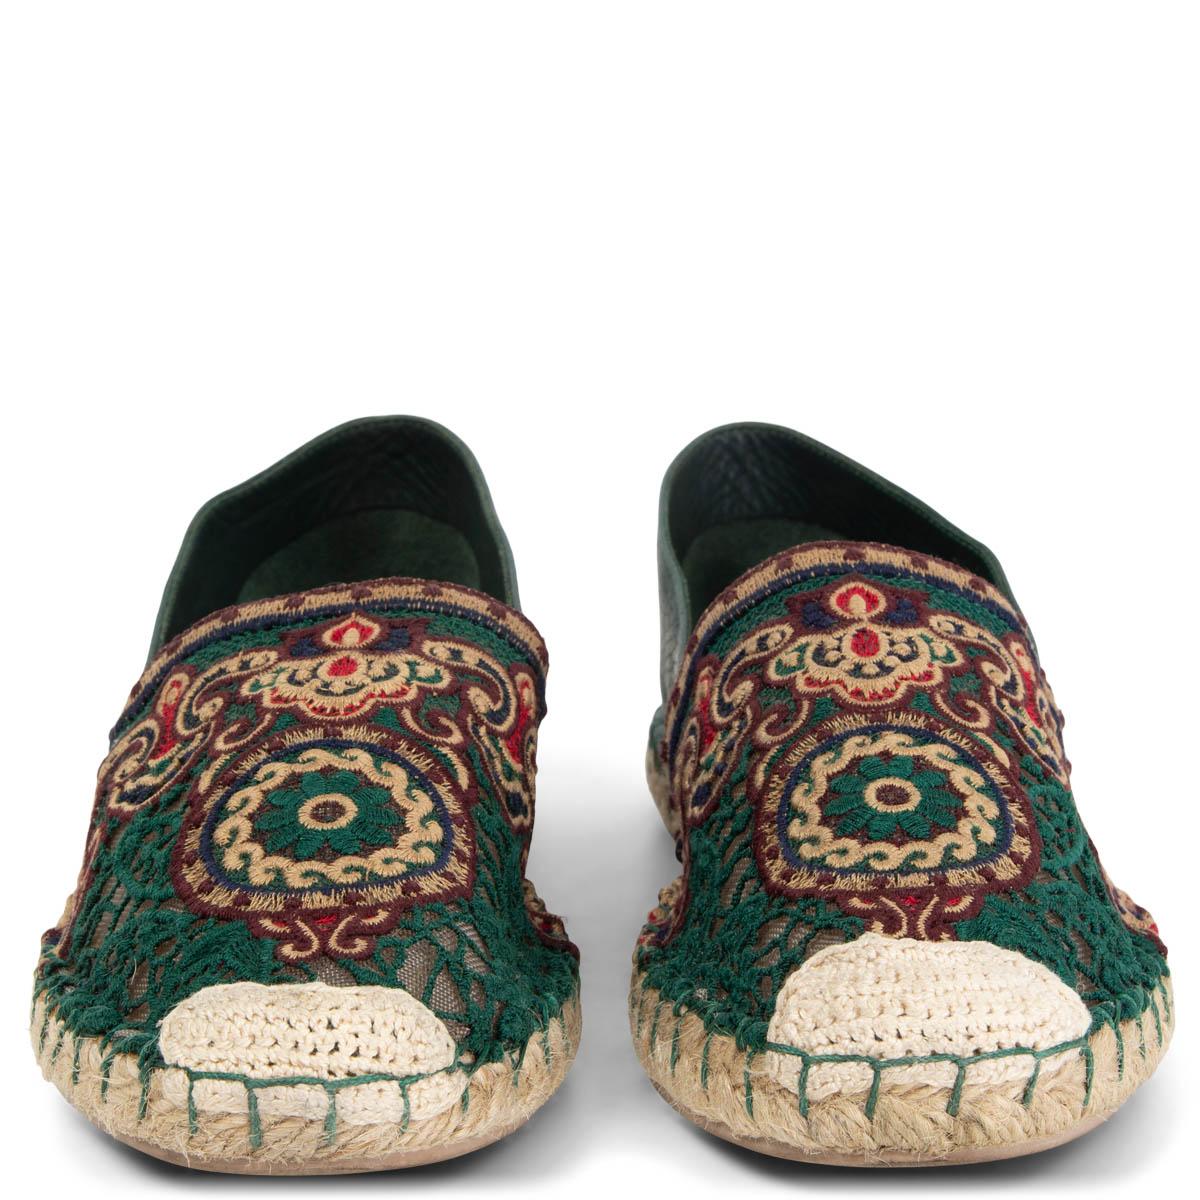 100% authentic Valentino espadrilles in moss green leather and embroidered lace in brown, beige and red with knitted fabric. Have been worn and are in excellent condition. (Show lots of wear on soles). 

Measurements
Imprinted Size	37
Shoe